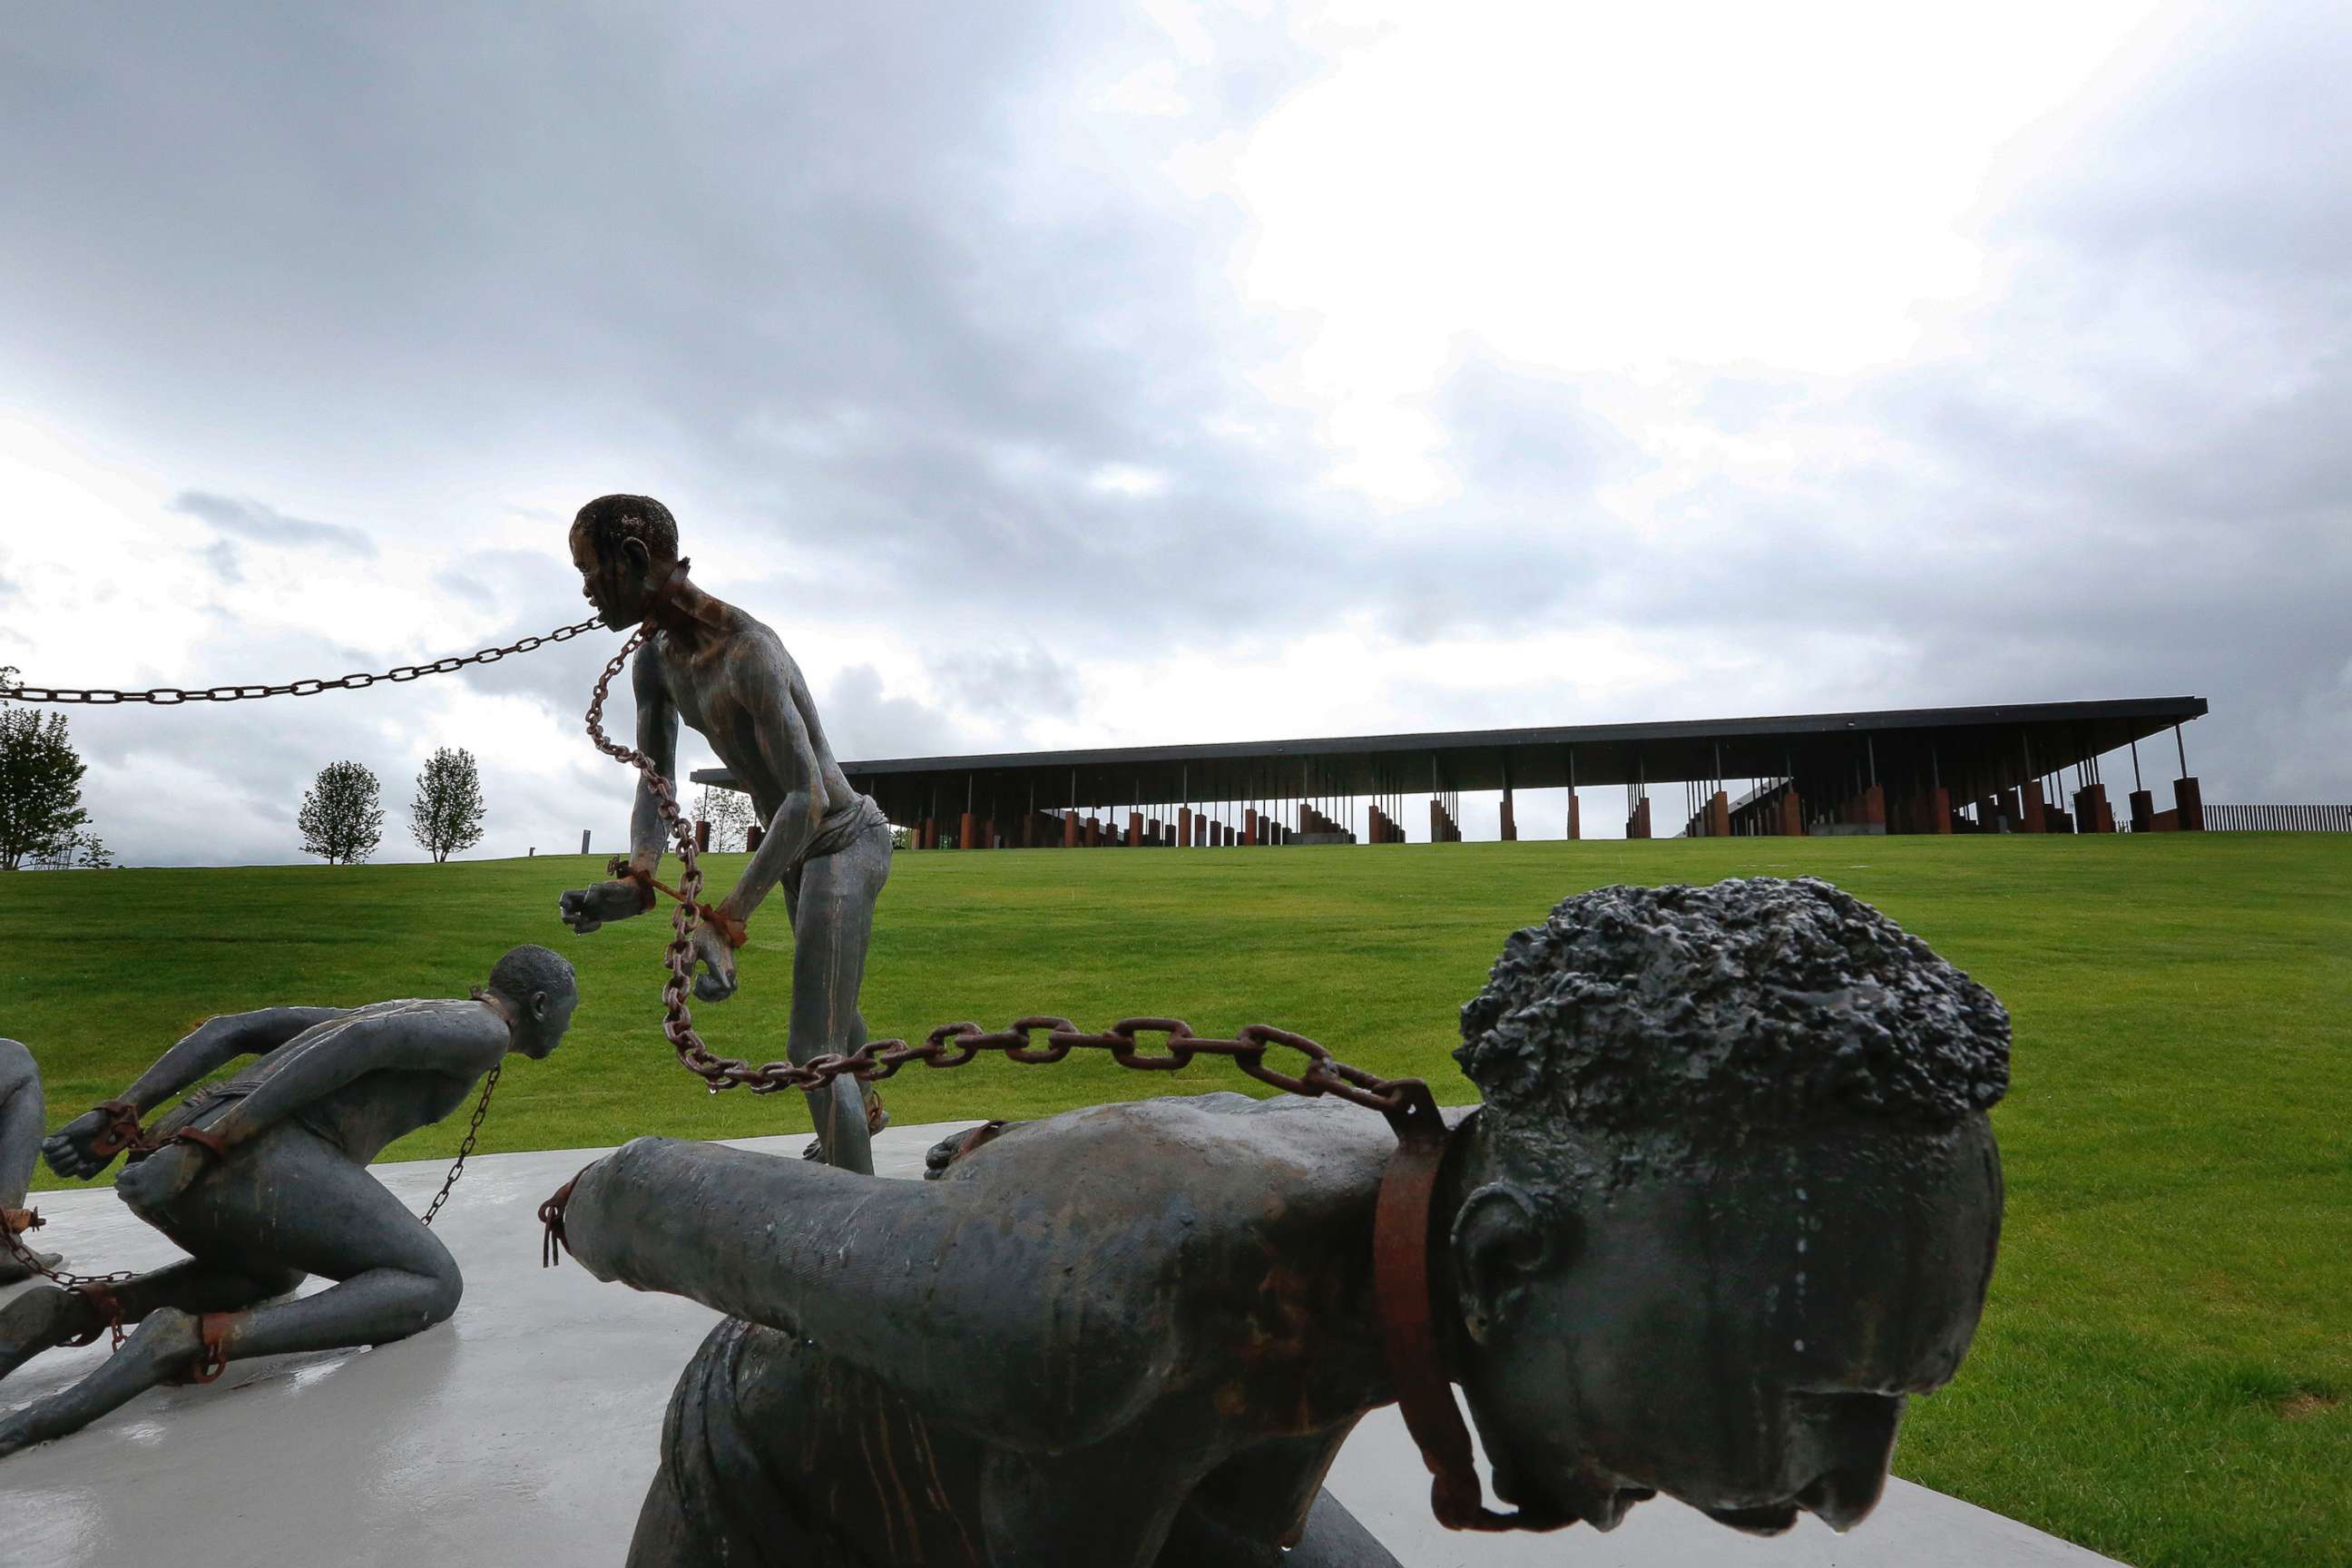 PHOTO: A statue depicting chained people on display at the National Memorial for Peace and Justice, a new memorial to honor thousands of people killed in racist lynchings, April 22, 2018, in Montgomery, Ala.